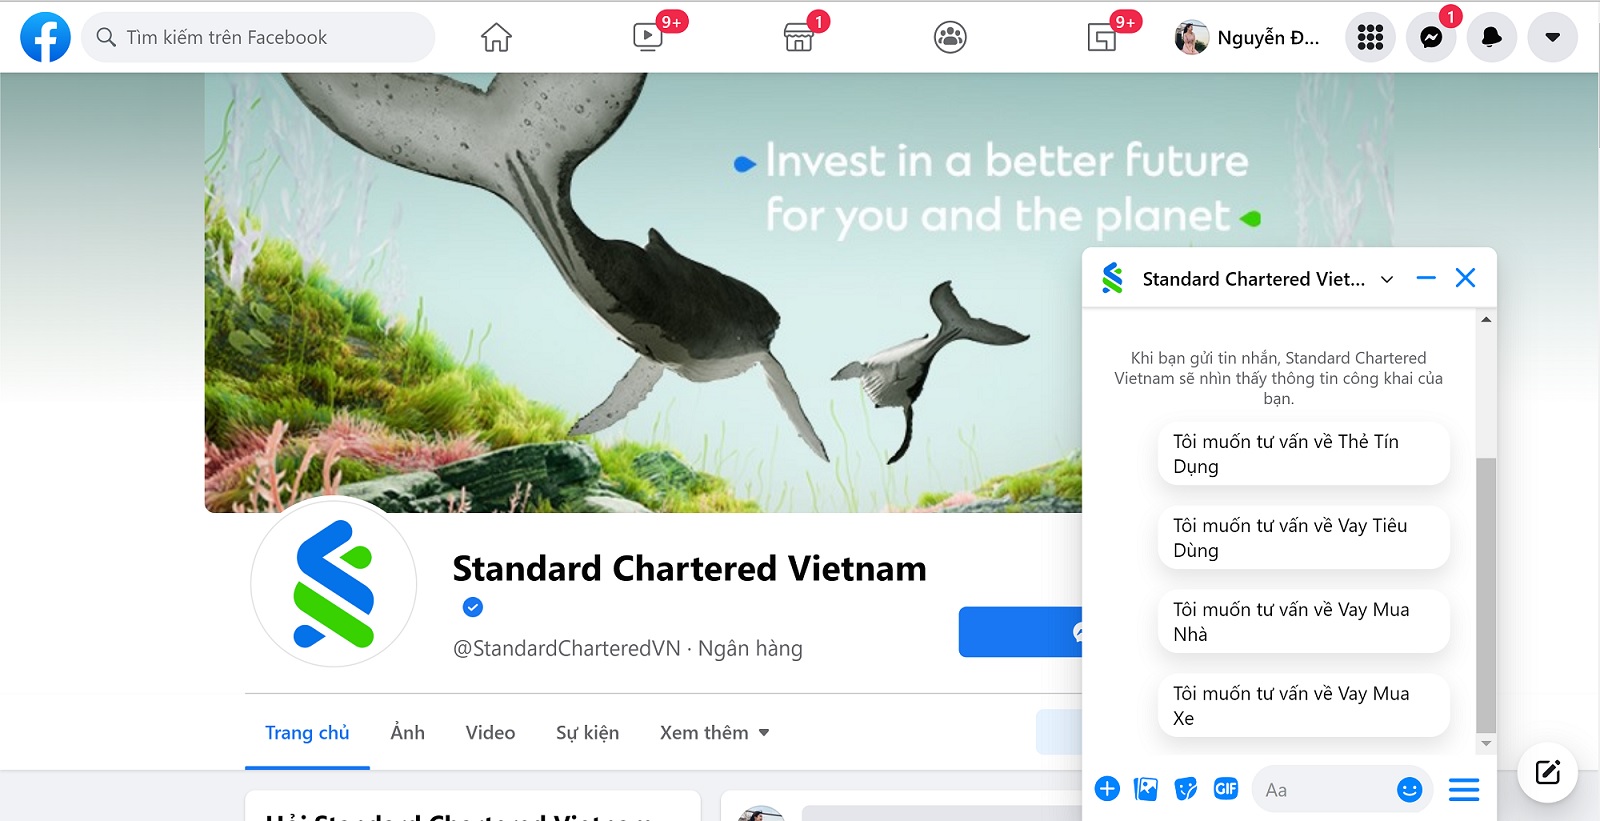 Fanpage Face book Standard Chartered Việt Nam